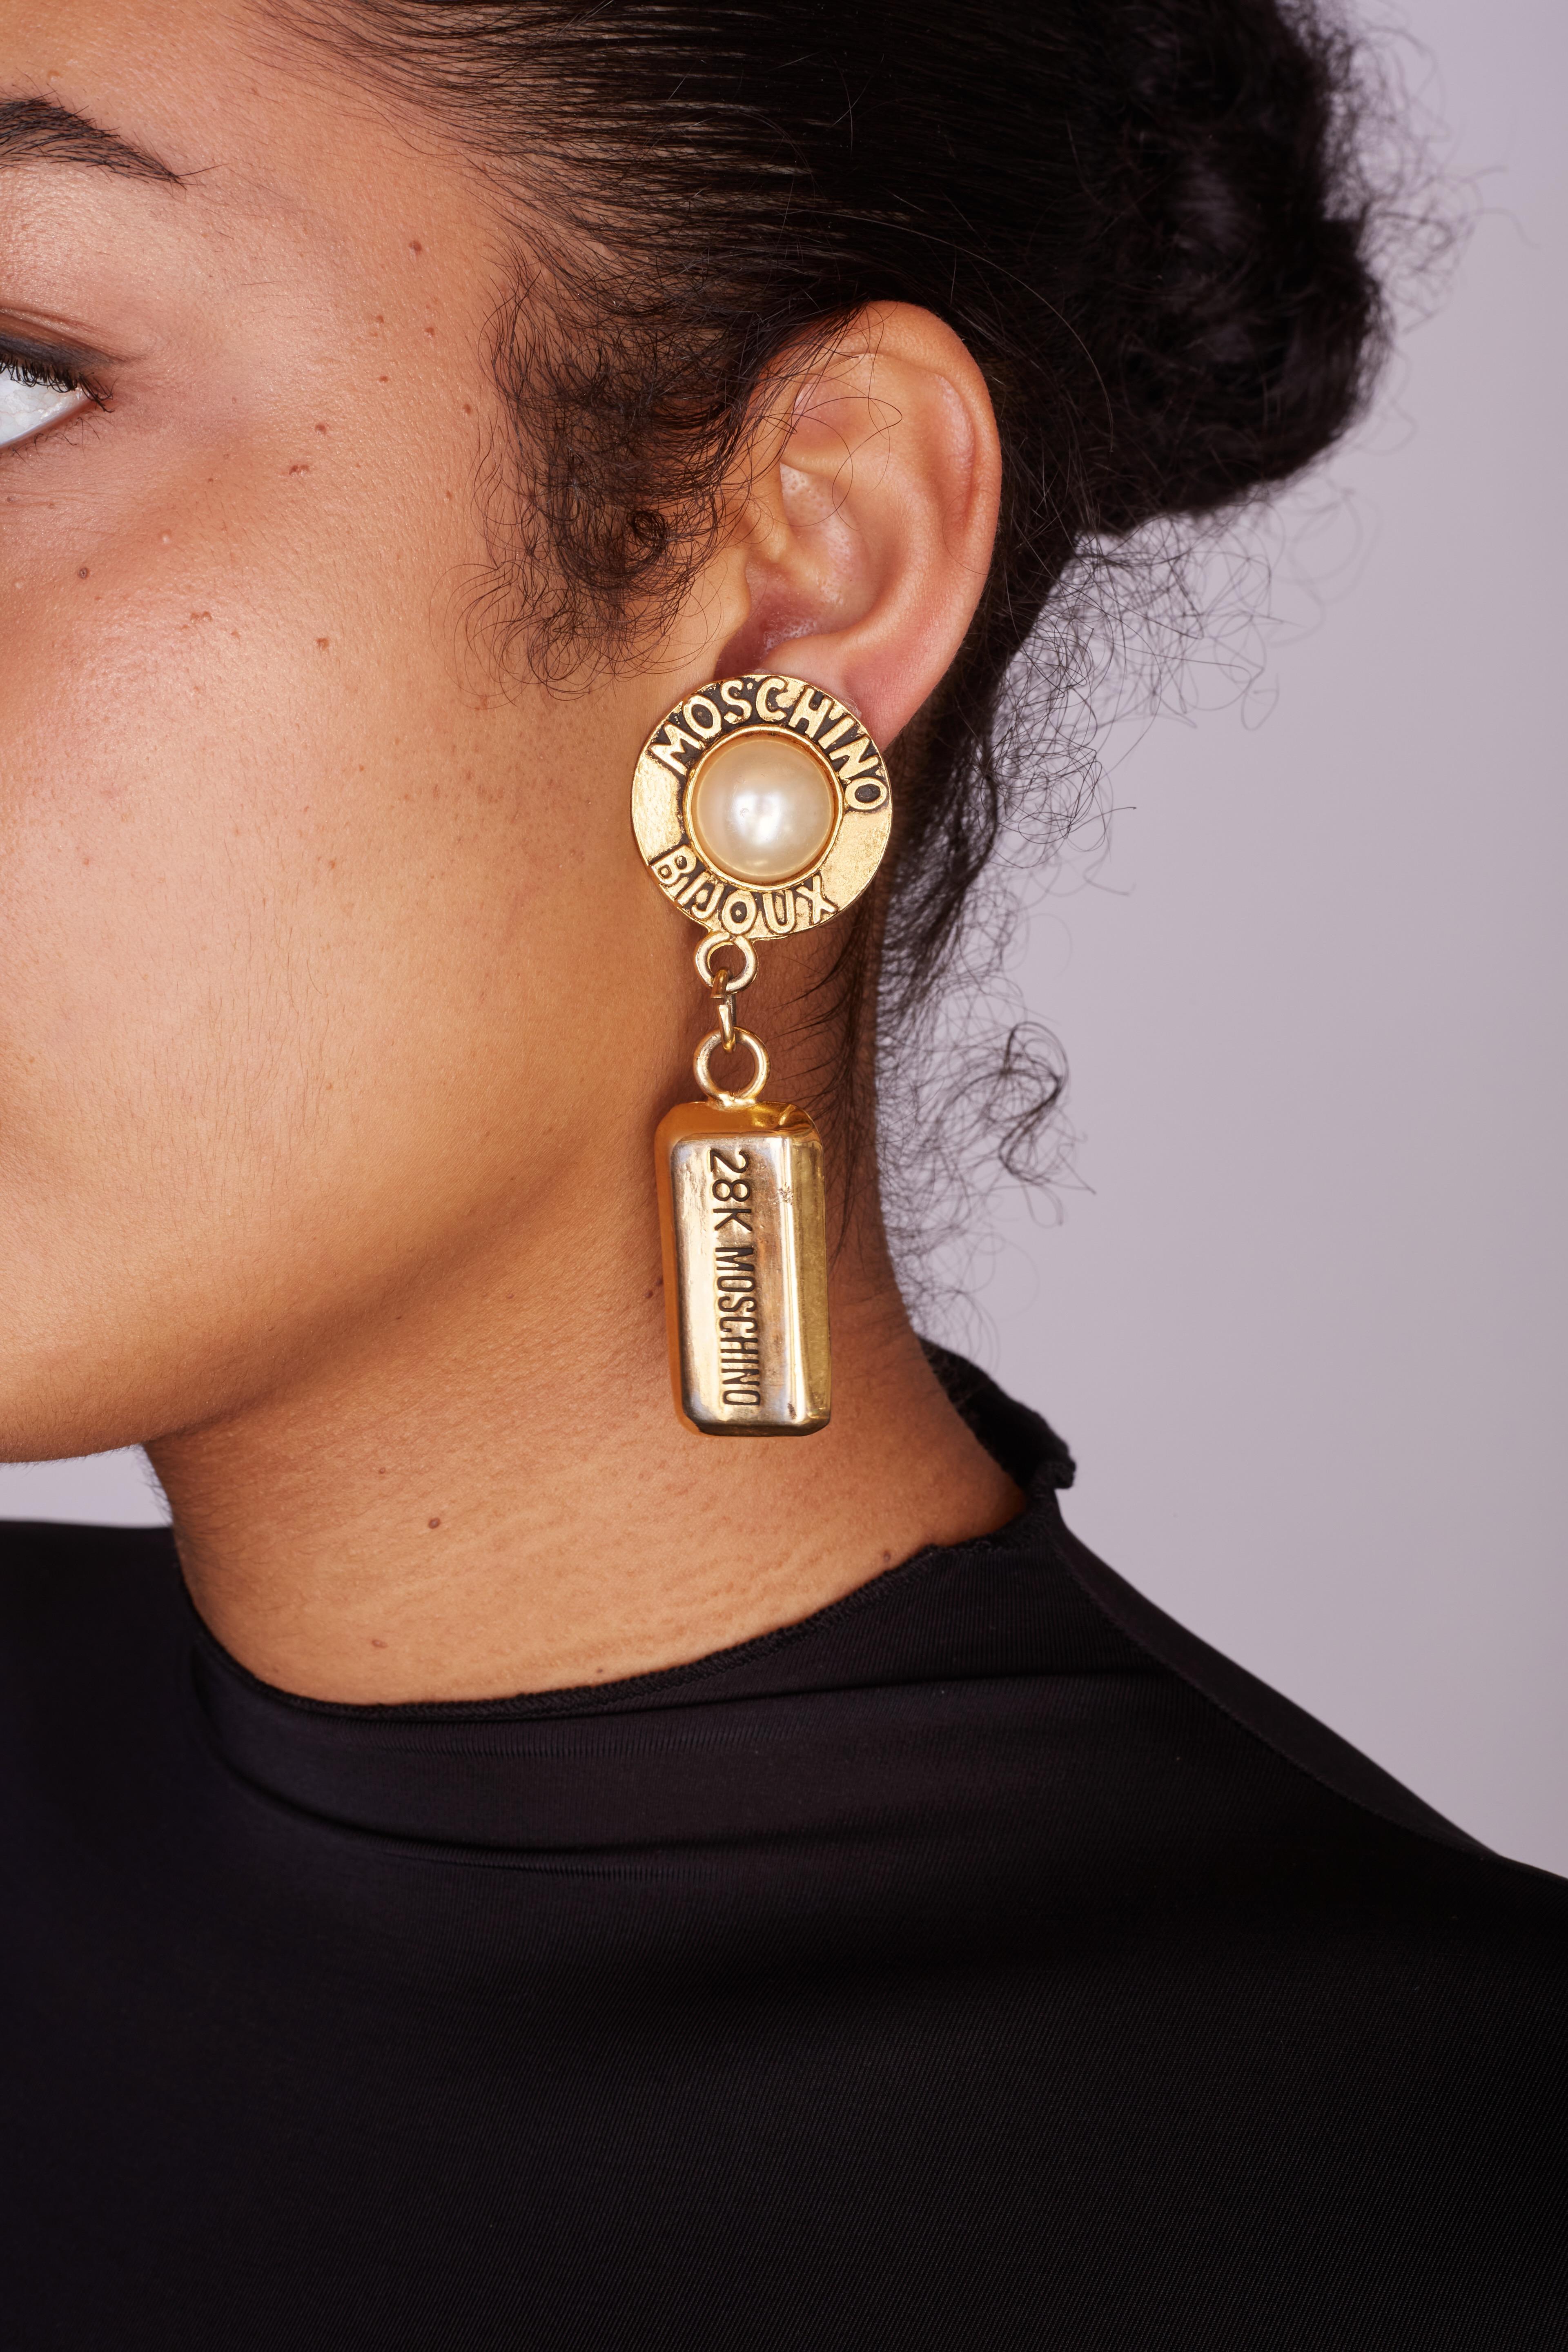 MOSCHINO VINTAGE CHUNKY GOLD BRICK PEARL EARRINGS

The vintage Moschino drop earrings from the 1990s feature a large faux pearl bead cabochon, a large metal bar motif pendant drop, gold tone color and are clip on earrings. Moschino Bijoux and 28K